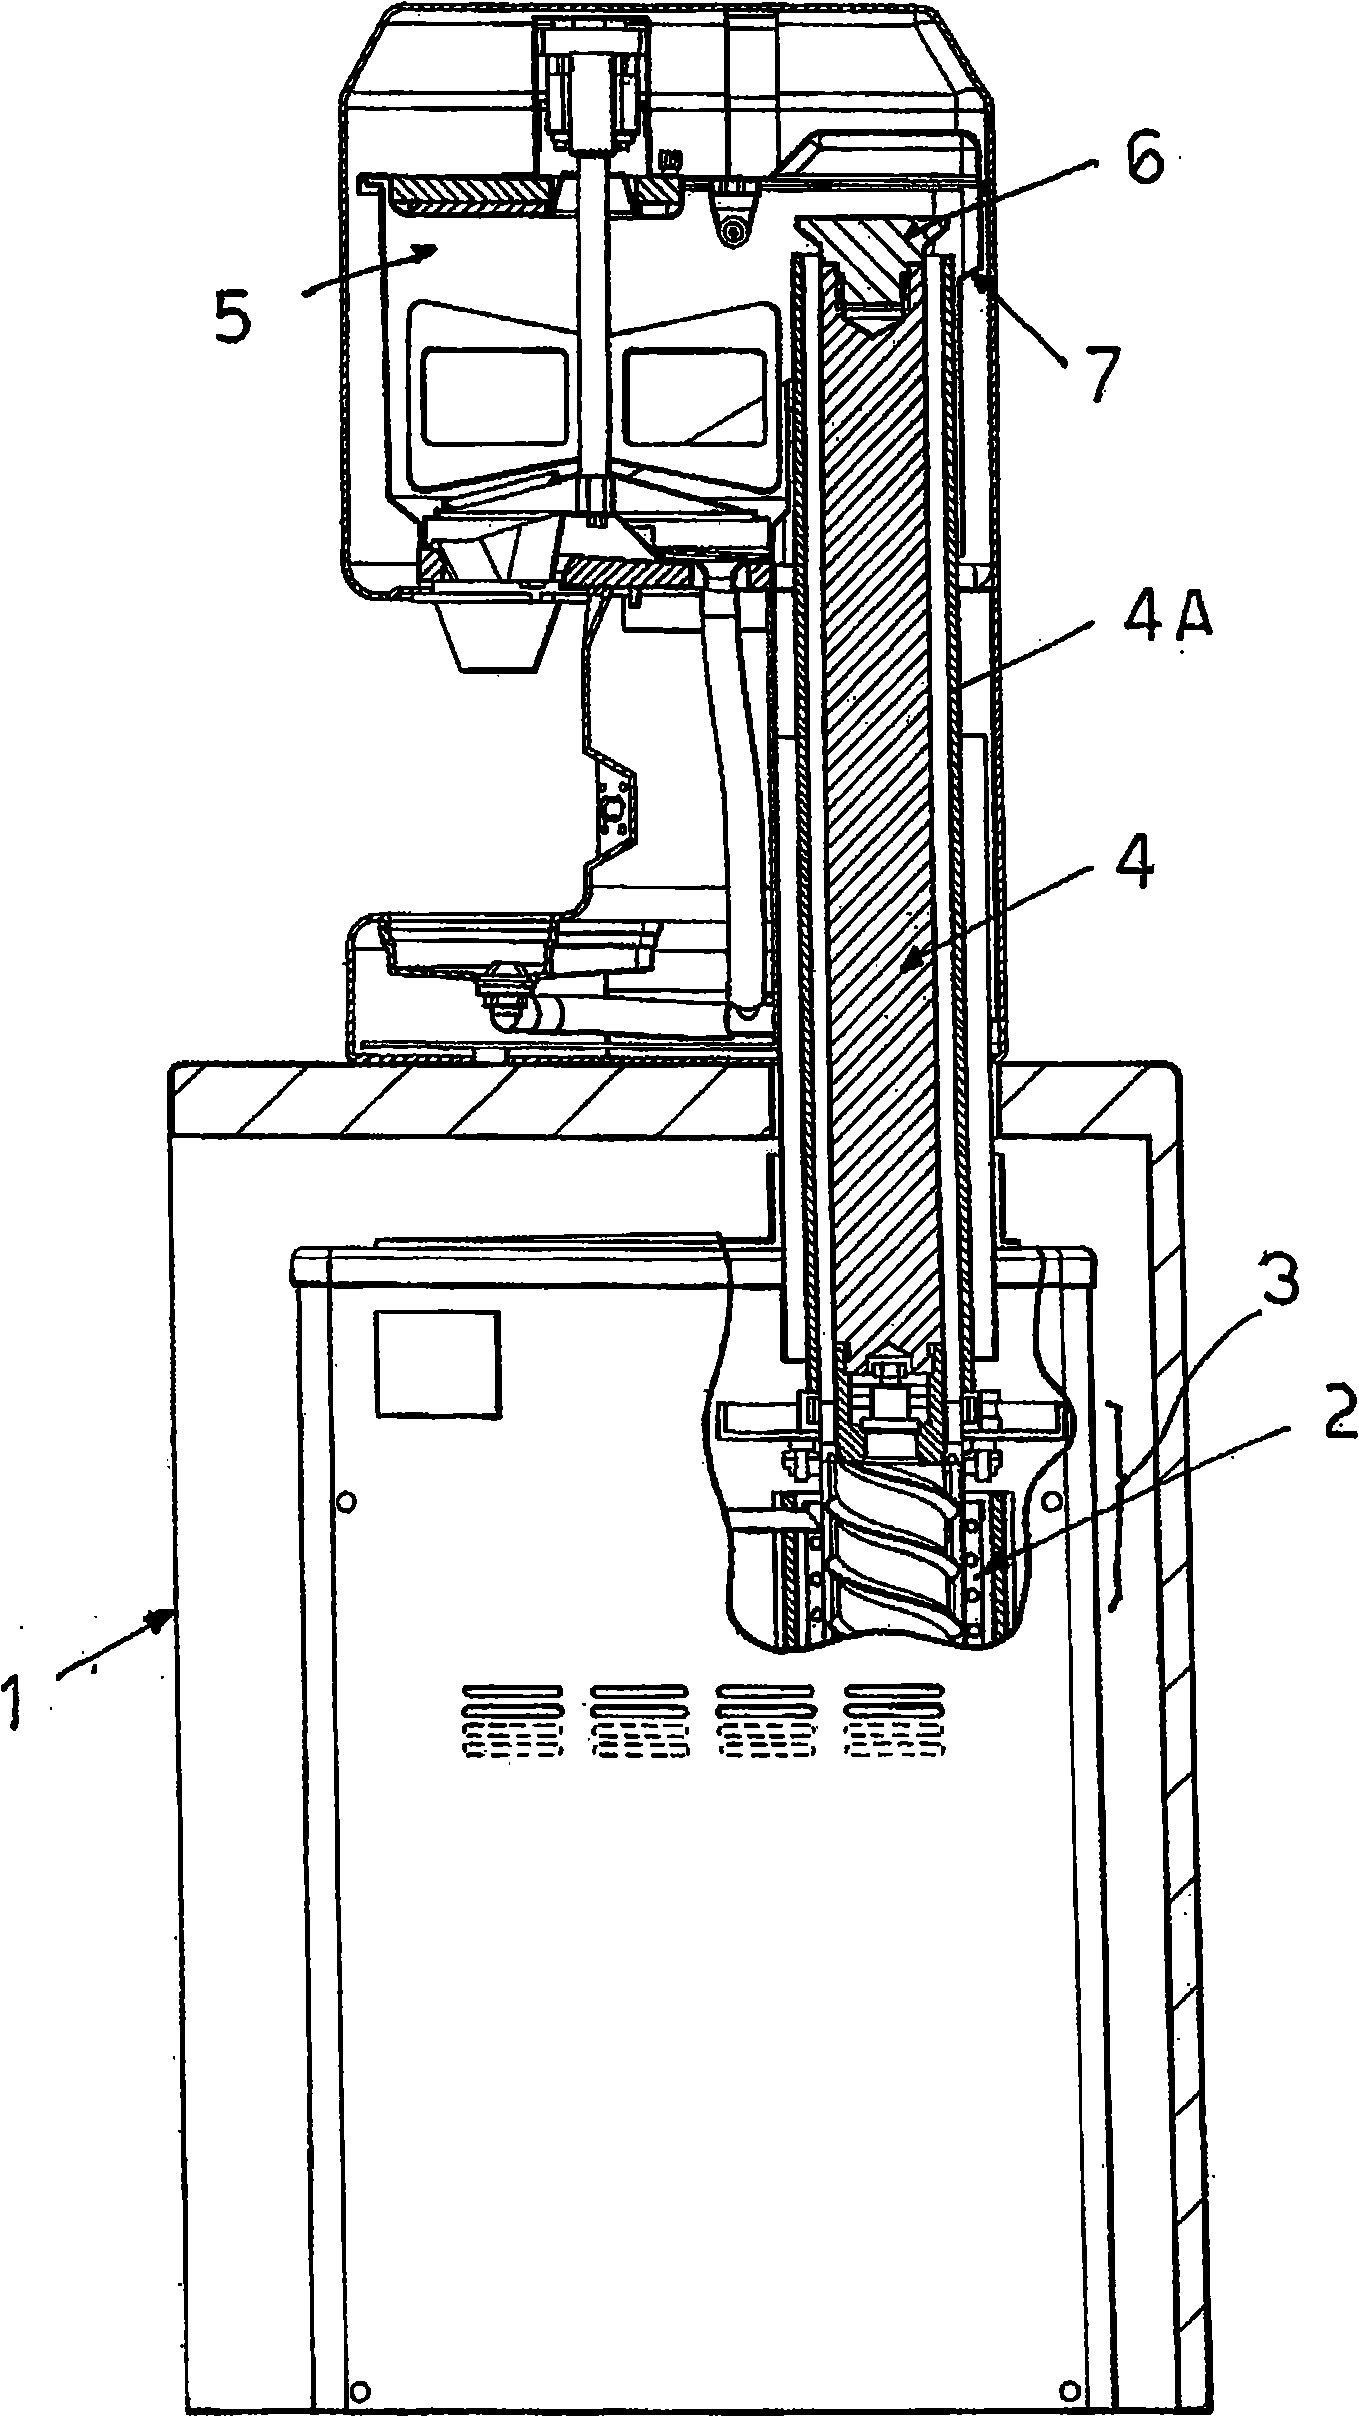 Machine for the production and distribution of ice particles